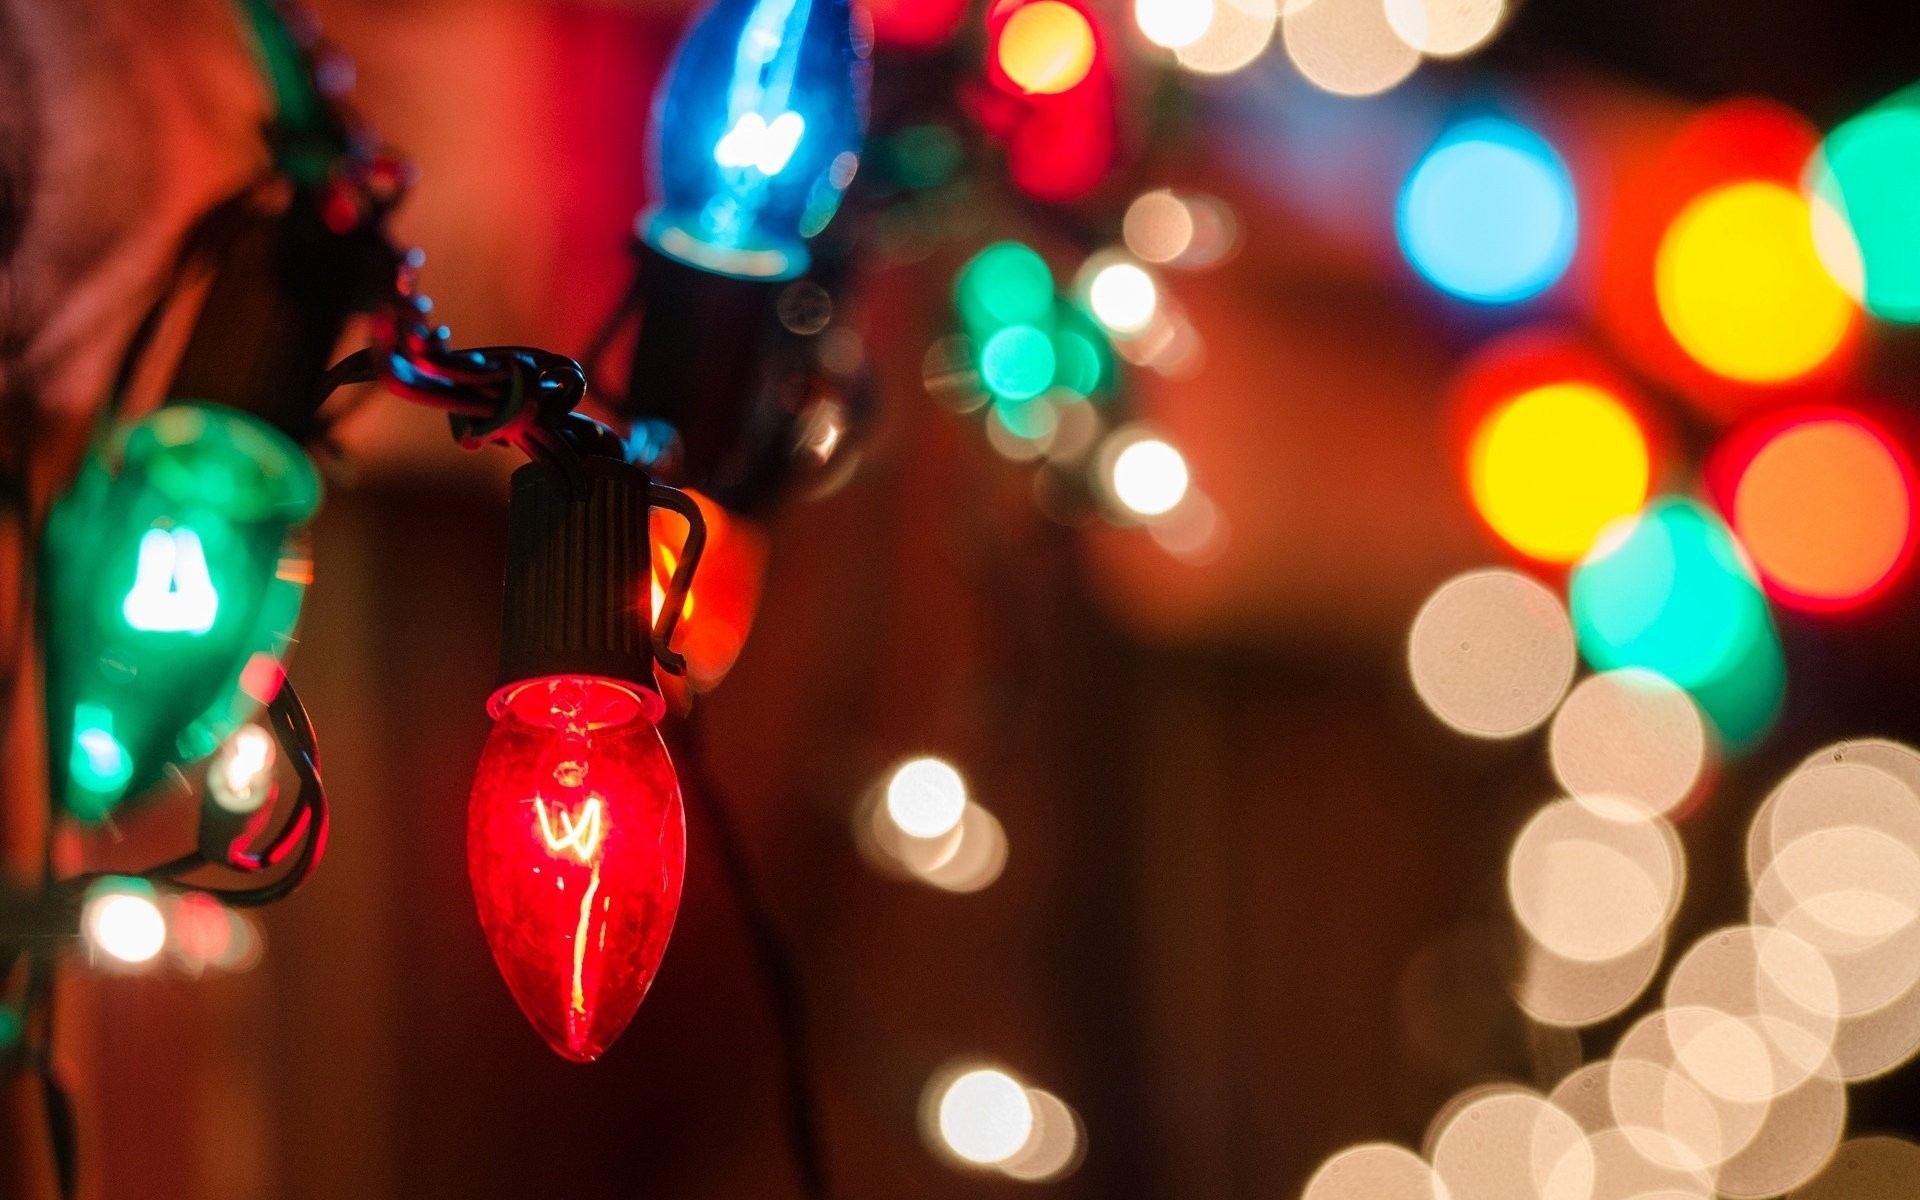 BUT I DIGRESS: What your choice of Christmas lights says about you | NEPA Scene1920 x 1200